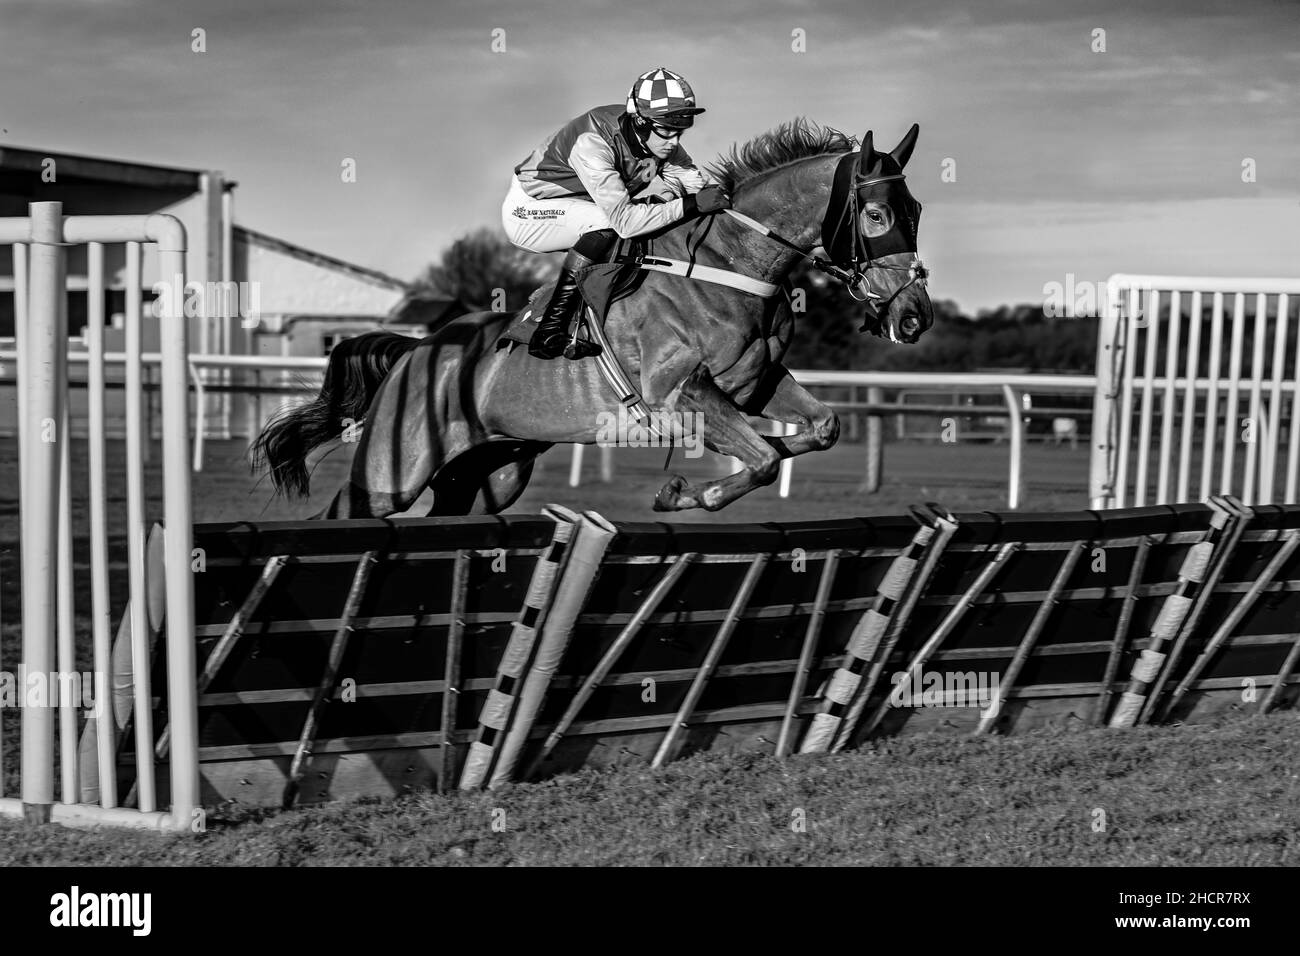 Fifth race at Wincanton December 2nd 2021 Stock Photo